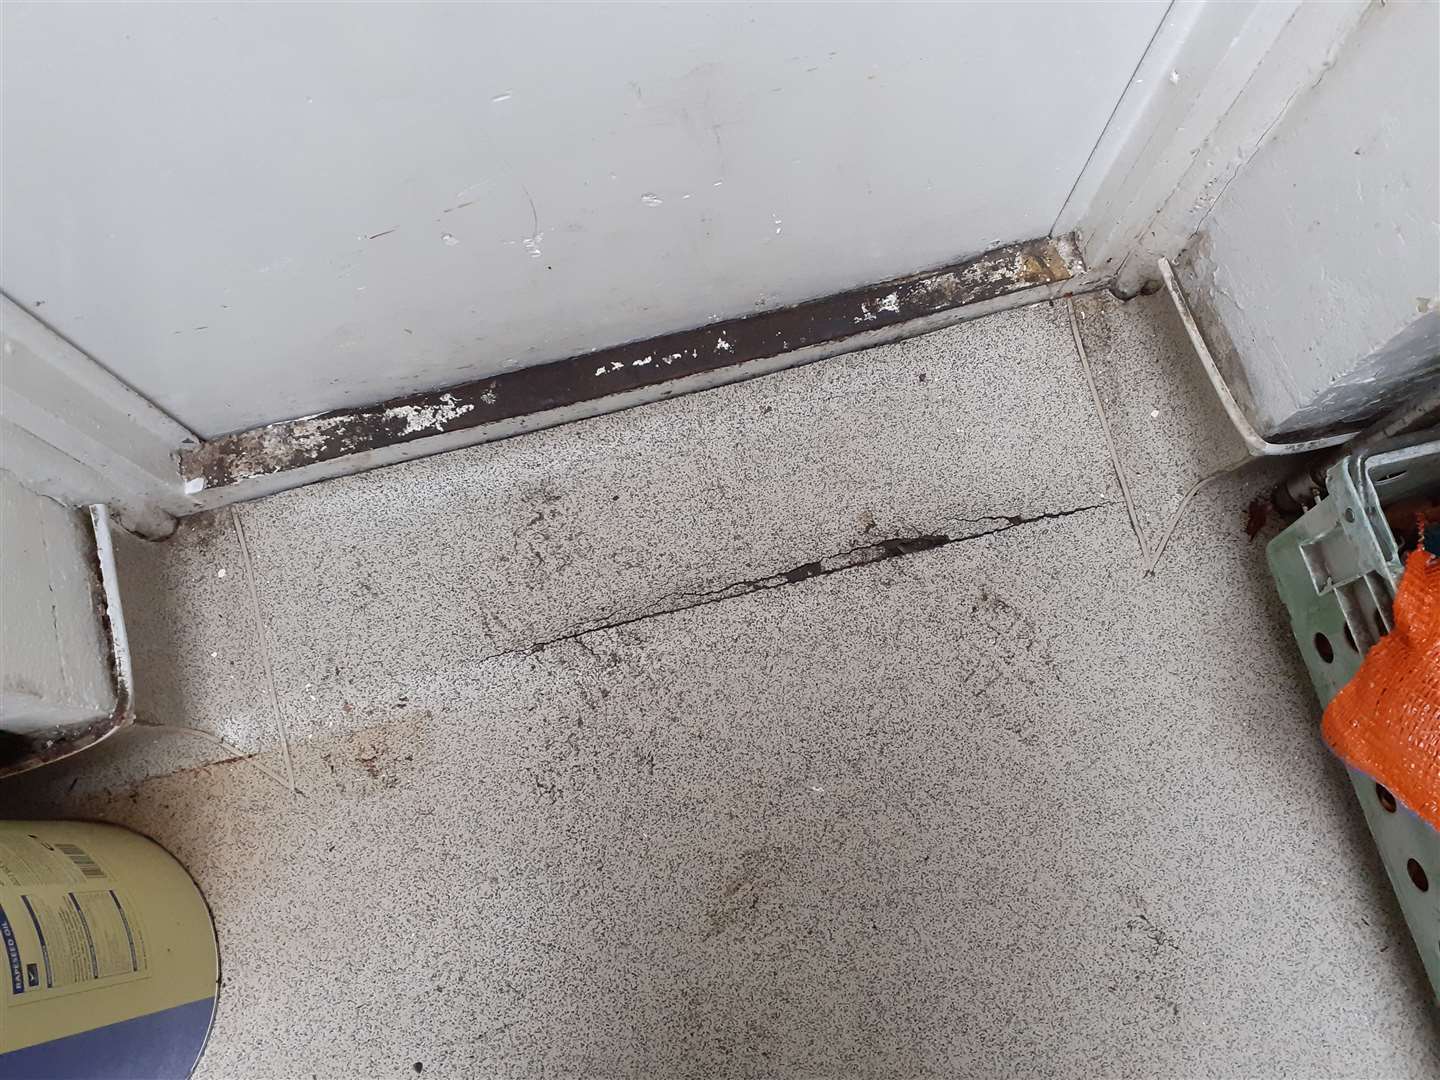 Dirt on the floor in Rico Sabor. Picture: Picture: Gravesend Borough Council